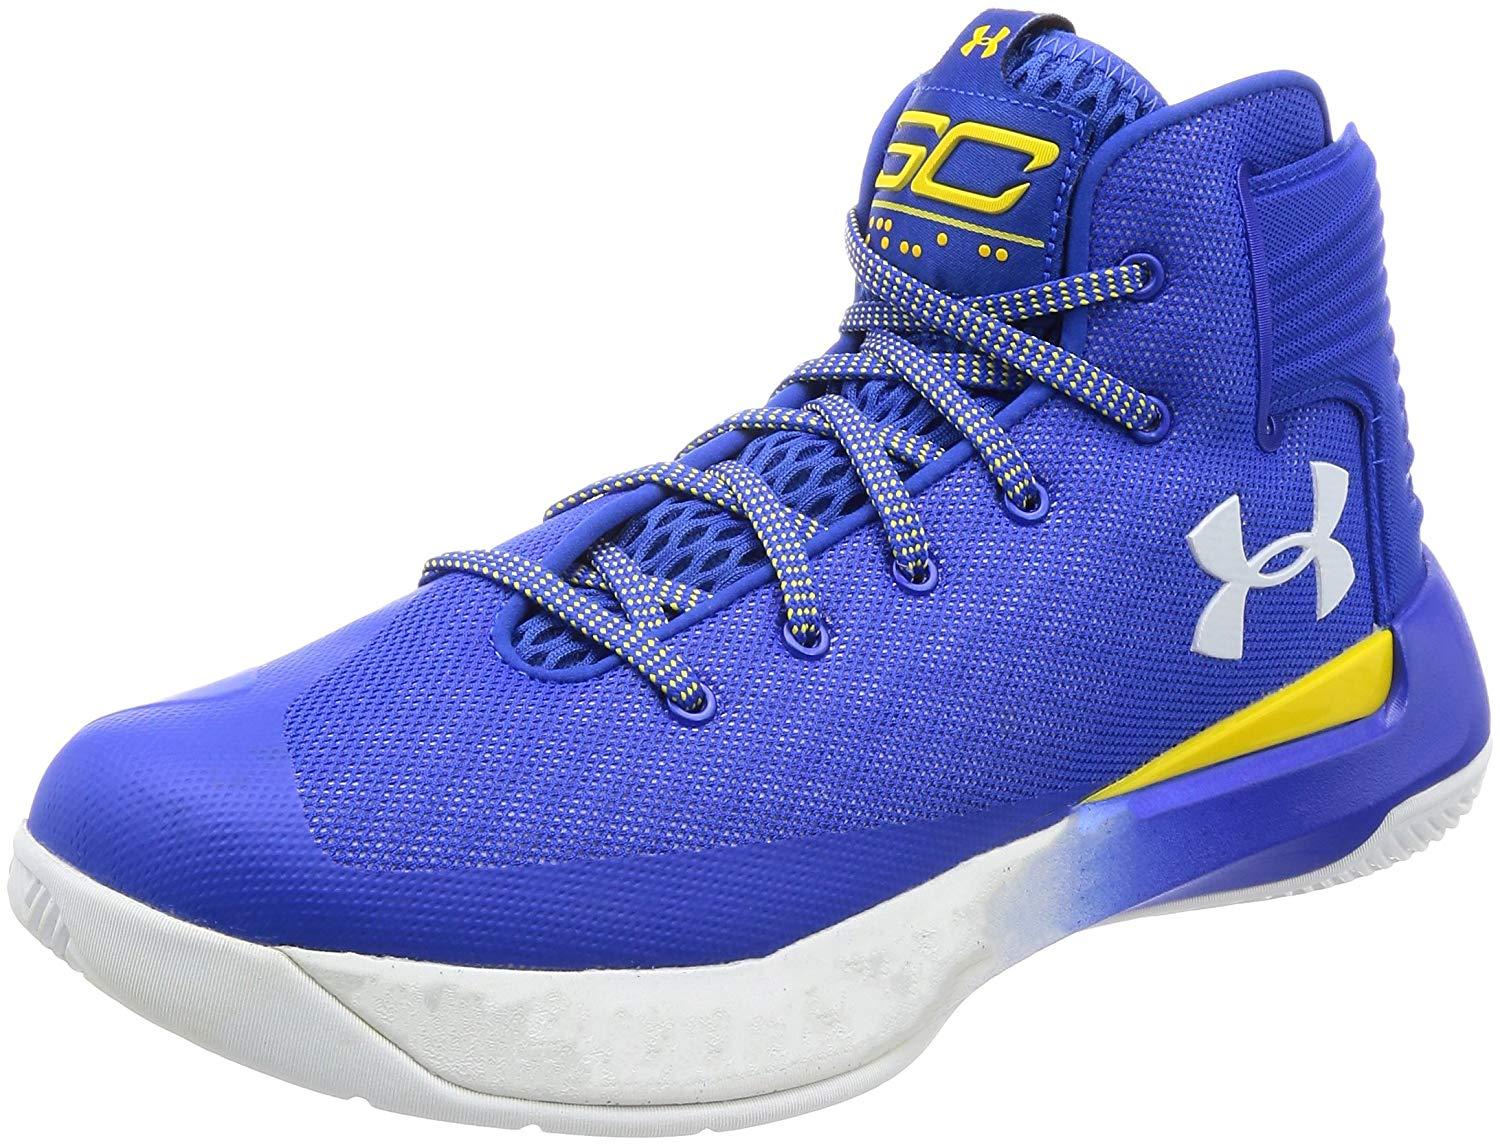 Under Armour Men's Curry 3 Basketball Shoes